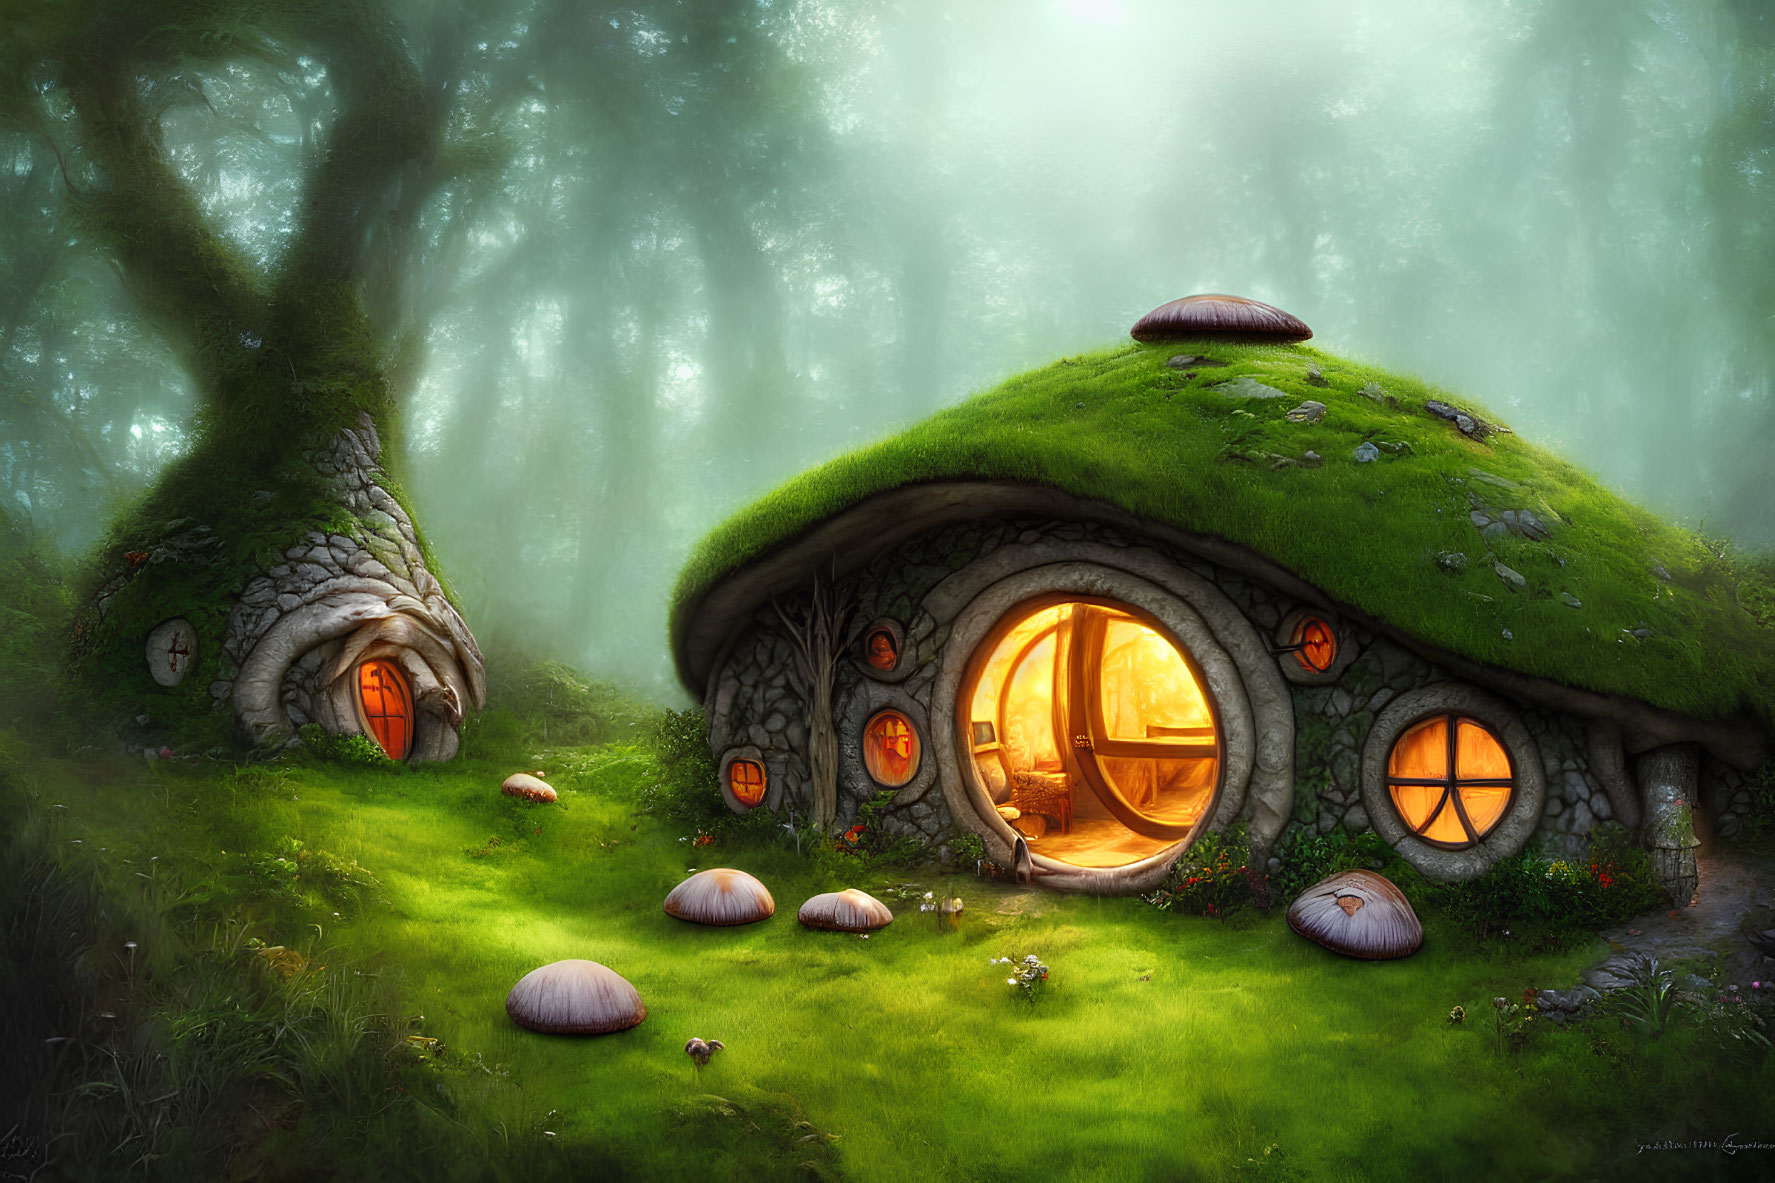 Enchanting forest scene with moss-covered cottage and oversized mushrooms